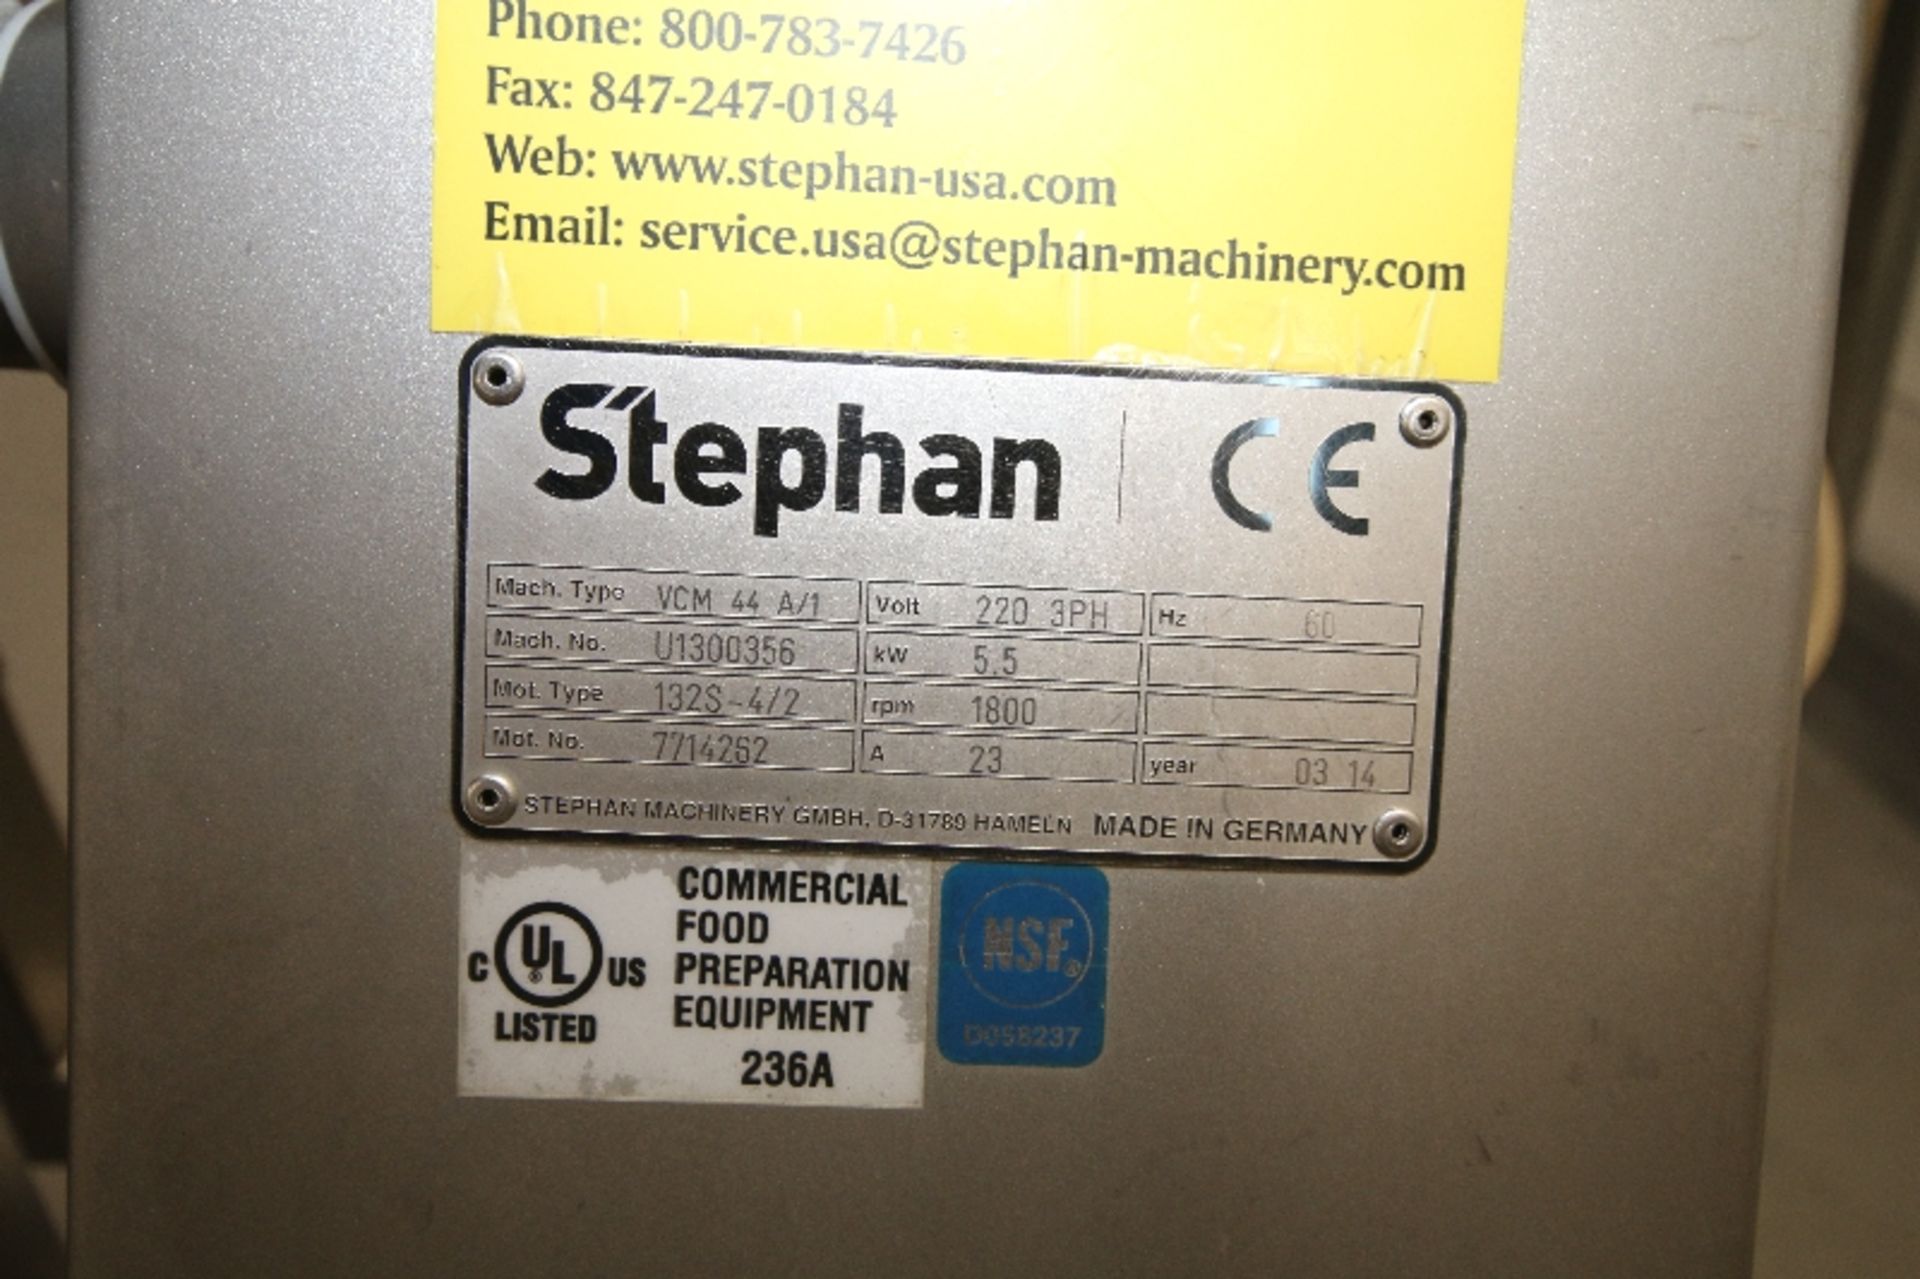 2014 Stephan VCM, M/N VCM 44 A/1, S/N U1300356, 1800 RPM, Mounted on S/S Frame with Casters, - Image 5 of 5